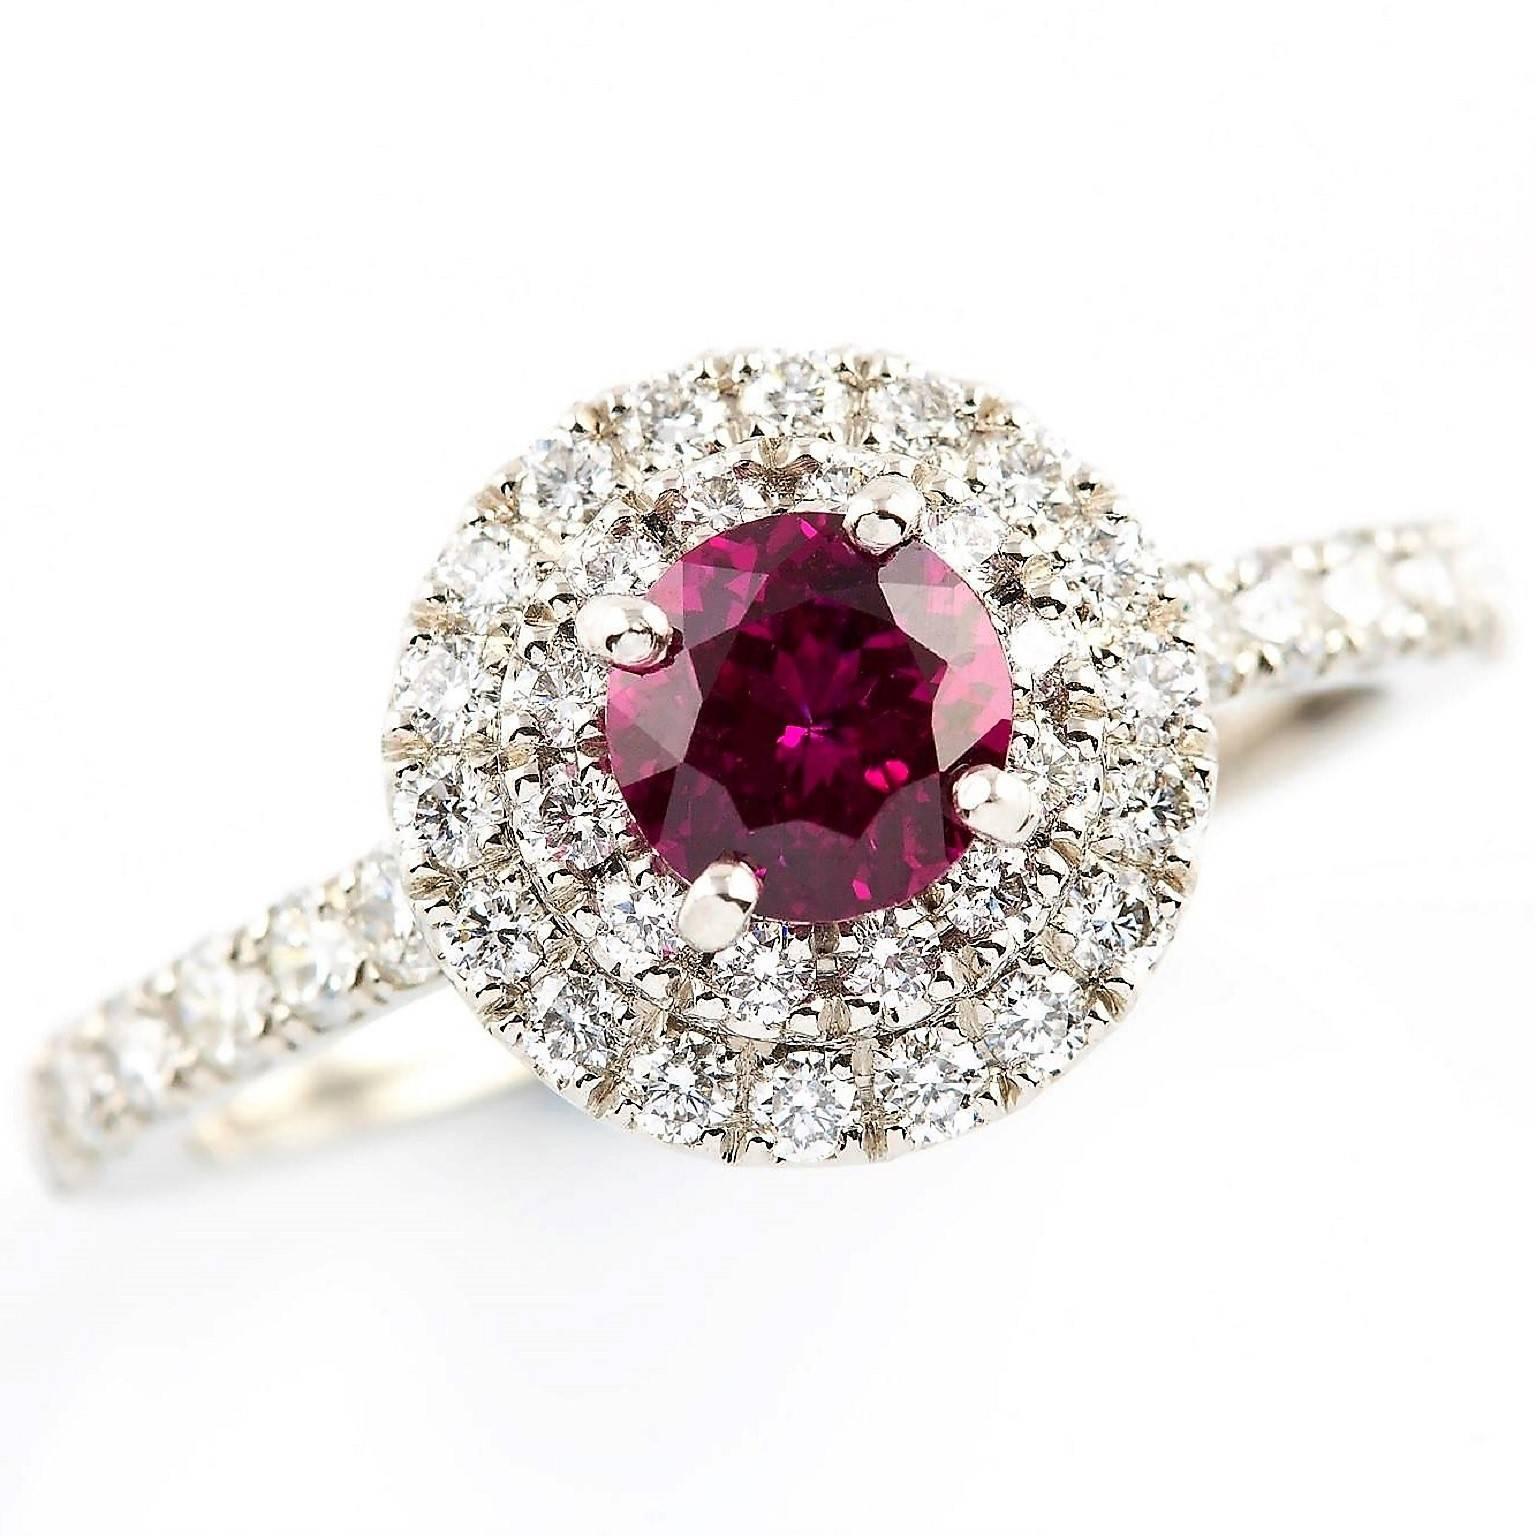 Rubino Halo Ring

This stunning platinum ring is set with an extraordinary round Burmese ruby complemented with a halo of diamonds. The diamonds are also set into the band. A distinctive heirloom piece.

Round faceted ruby: Deep bright pink, Burma